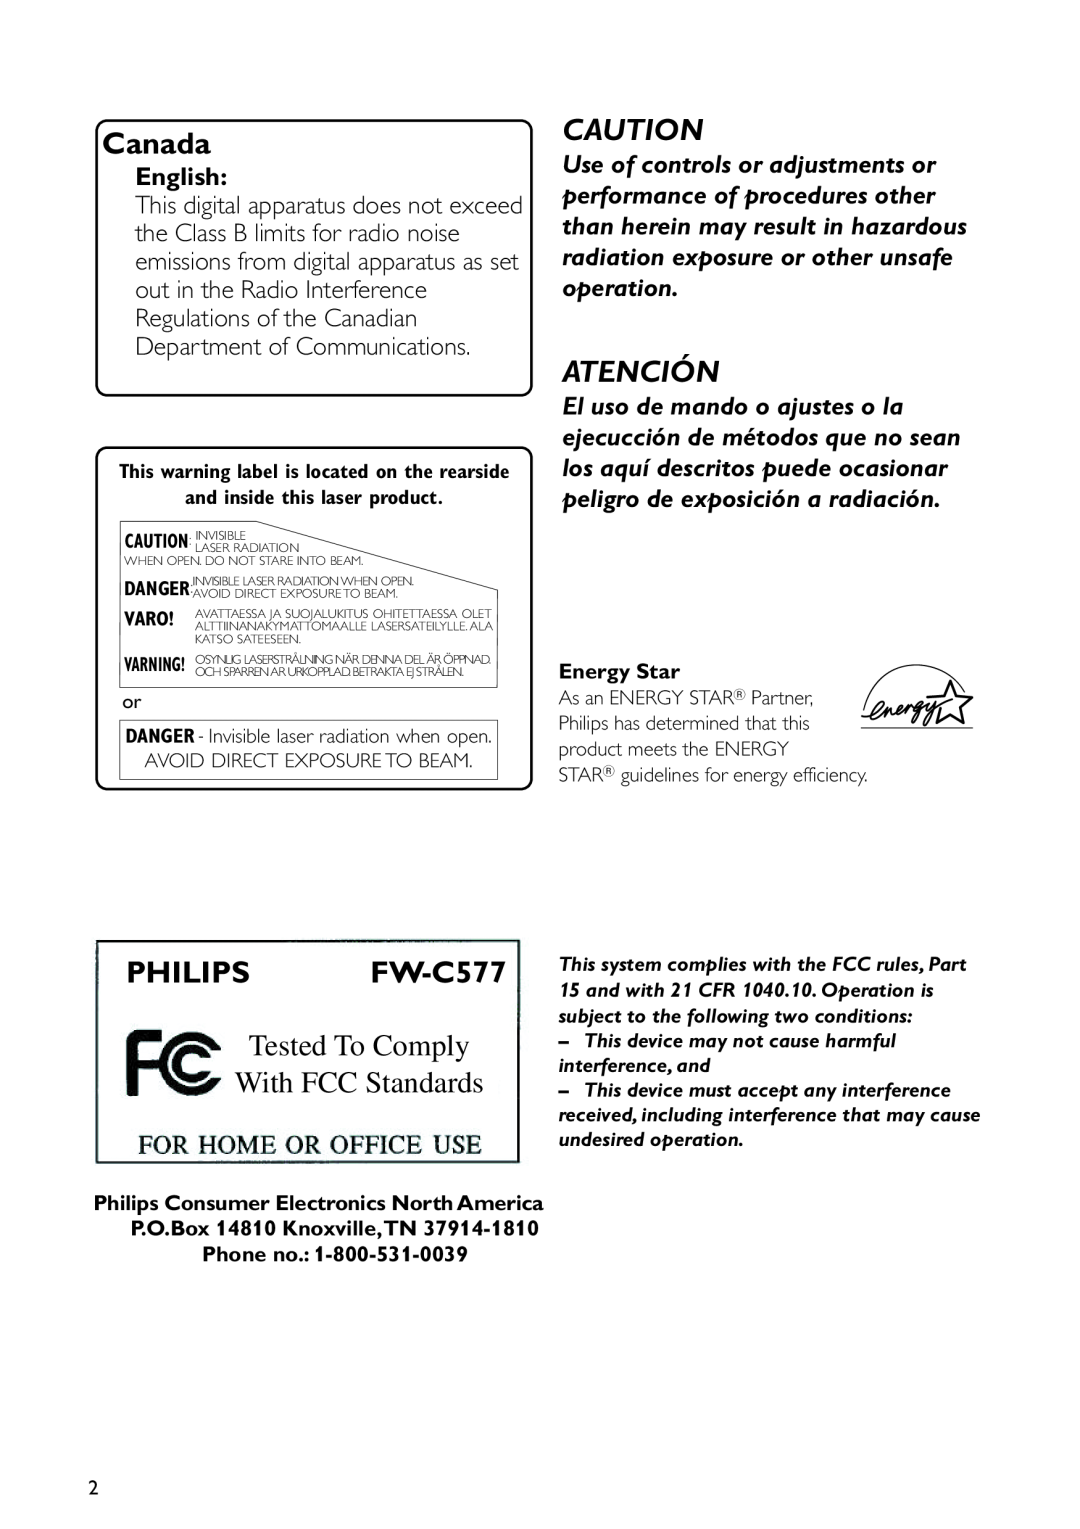 Philips FWC577 warranty Atención, English, Canada, PHILIPS FW-C577, Tested To Comply With FCC Standards, Energy Star 